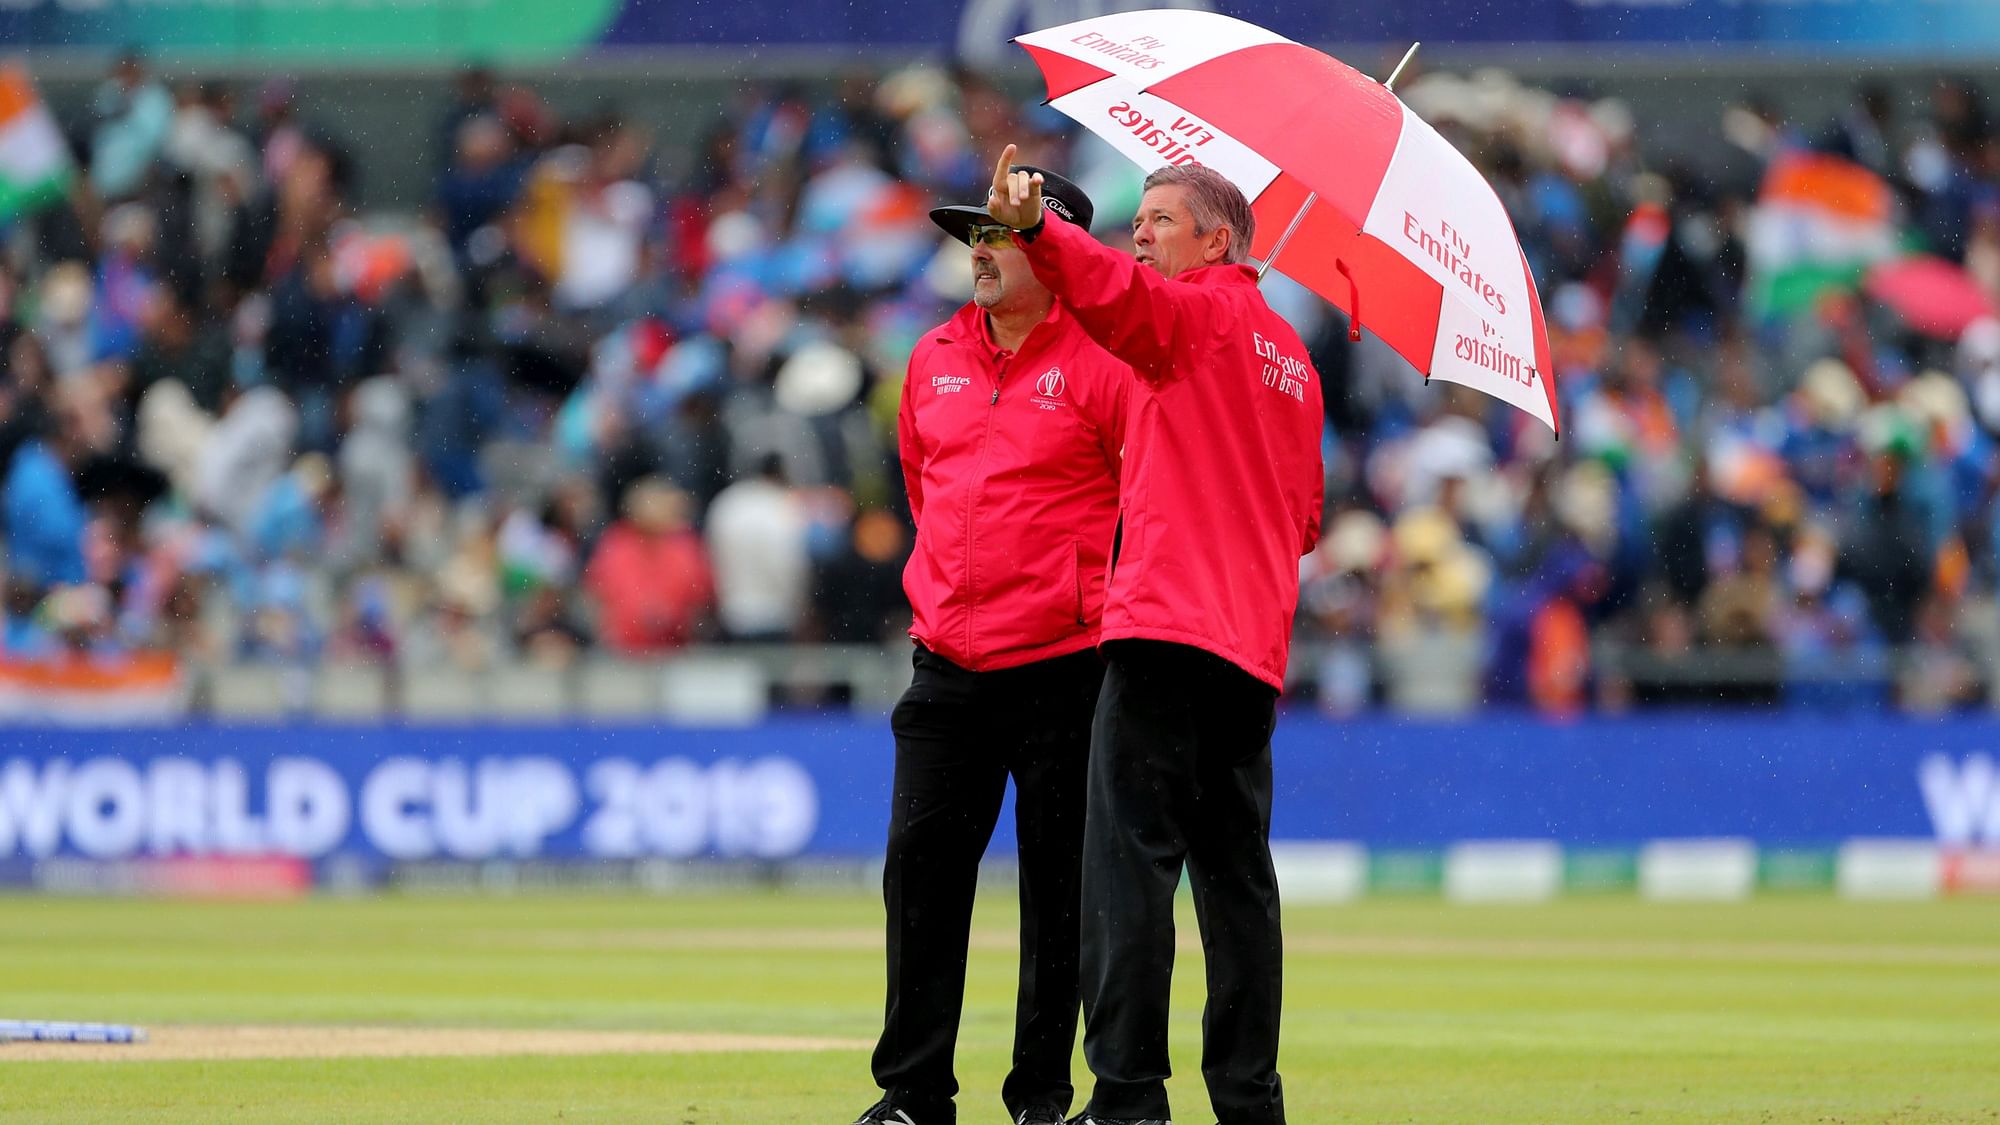 Umpires interact after rain stopped play during the Cricket World Cup semi-final match between India and New Zealand at Old Trafford in Manchester.